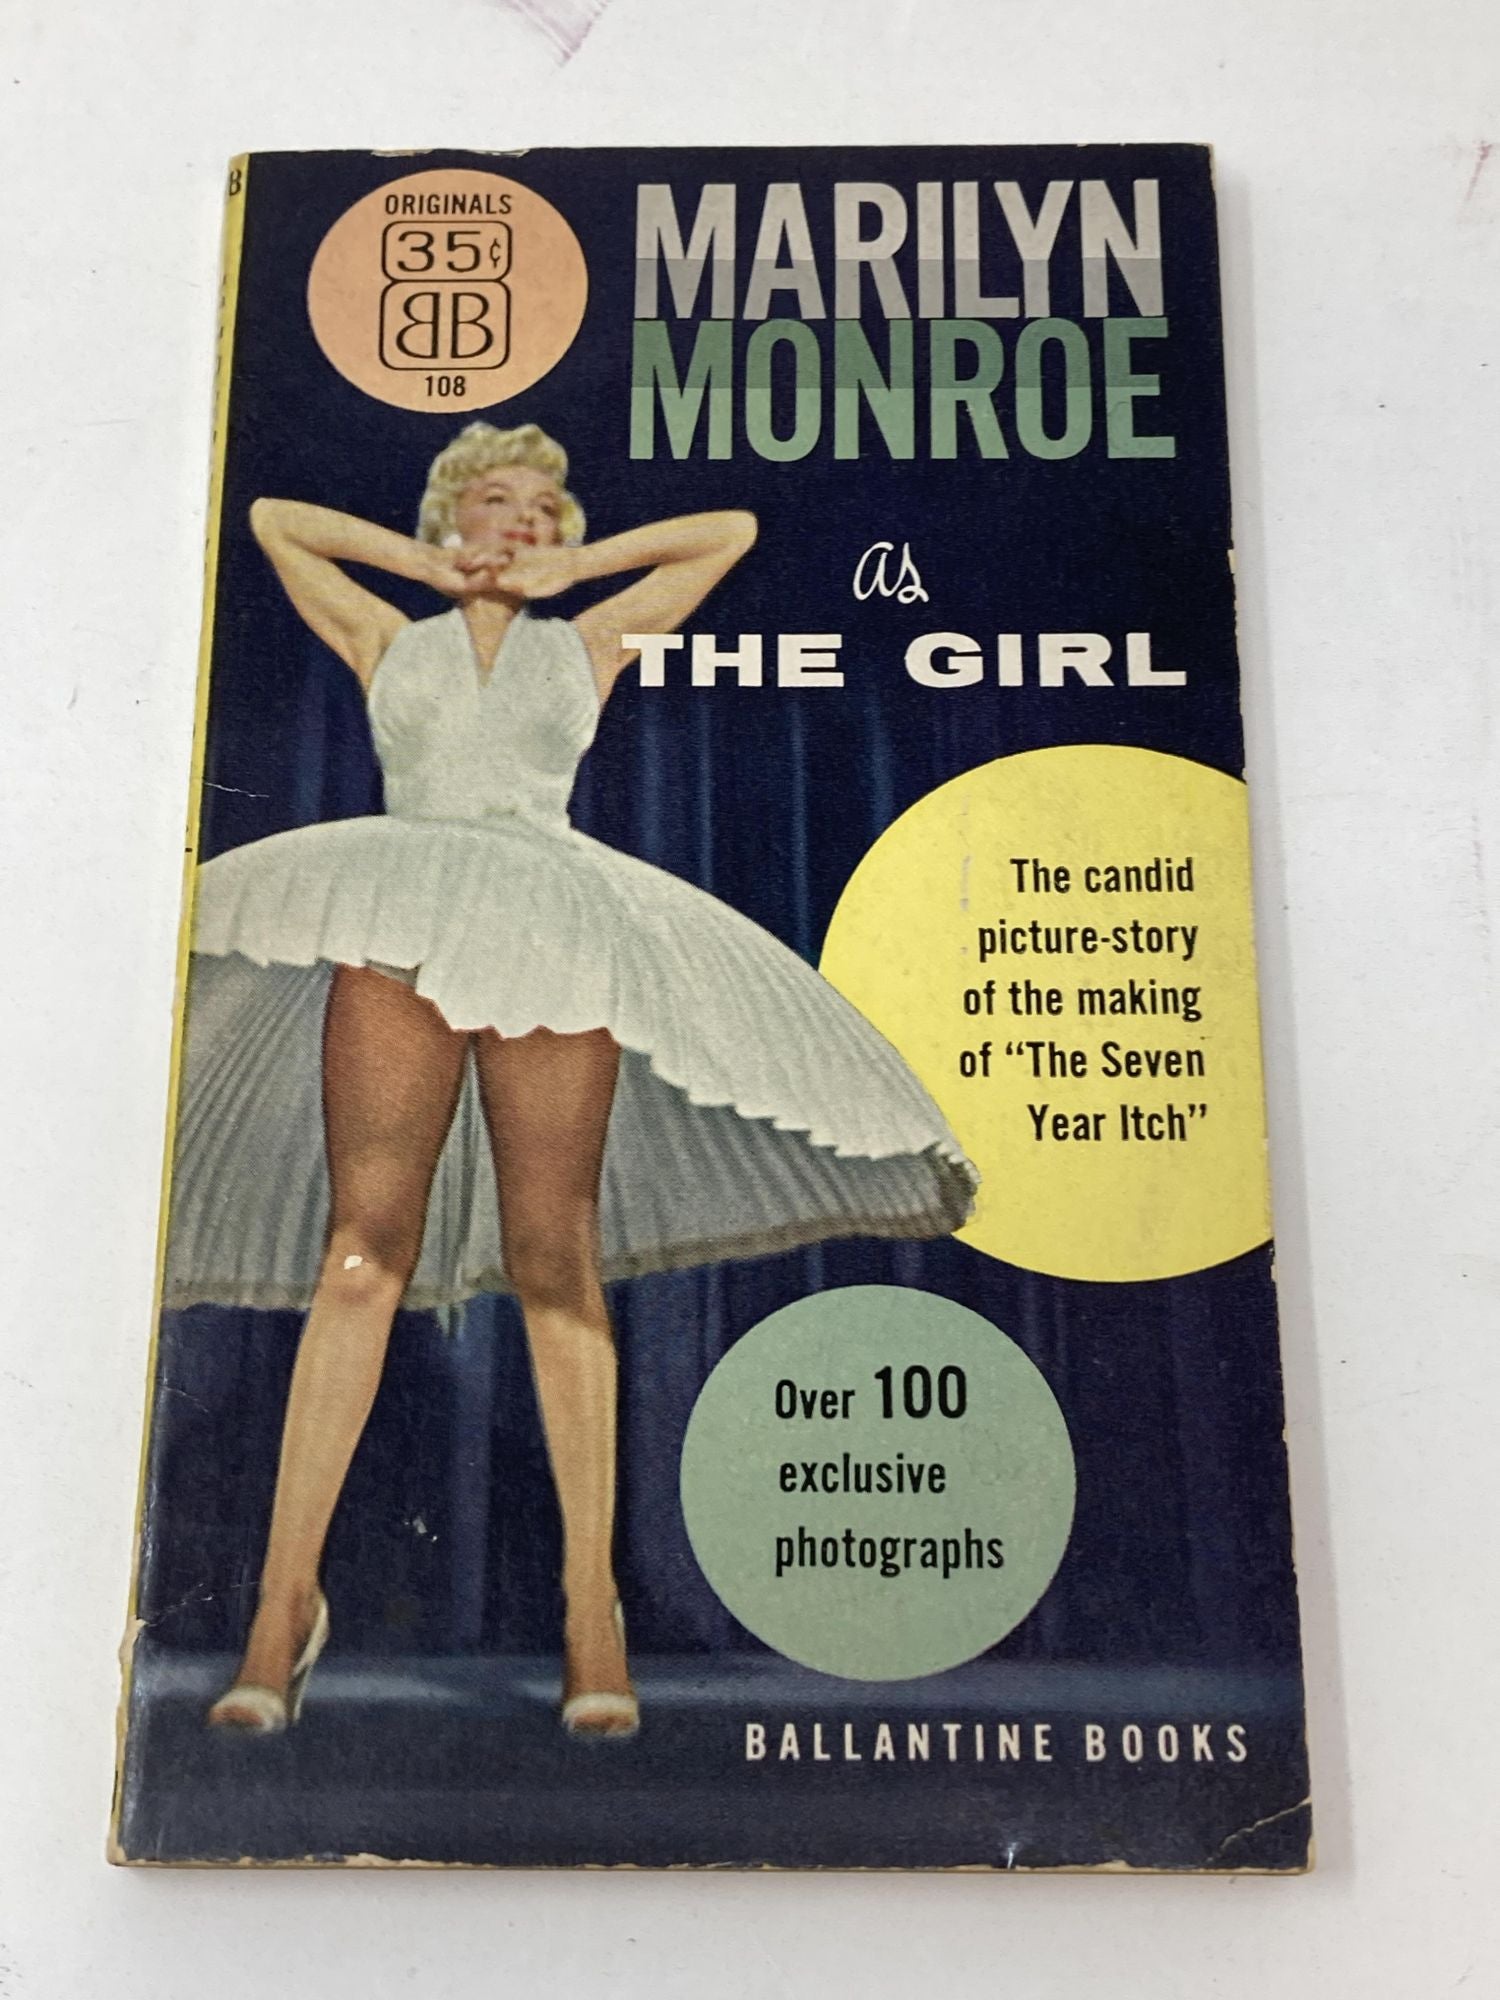 Shaw, Sam (Photographer) - Marilyn Monroe As the Girl; the Candid Picture-Story of the Making of 